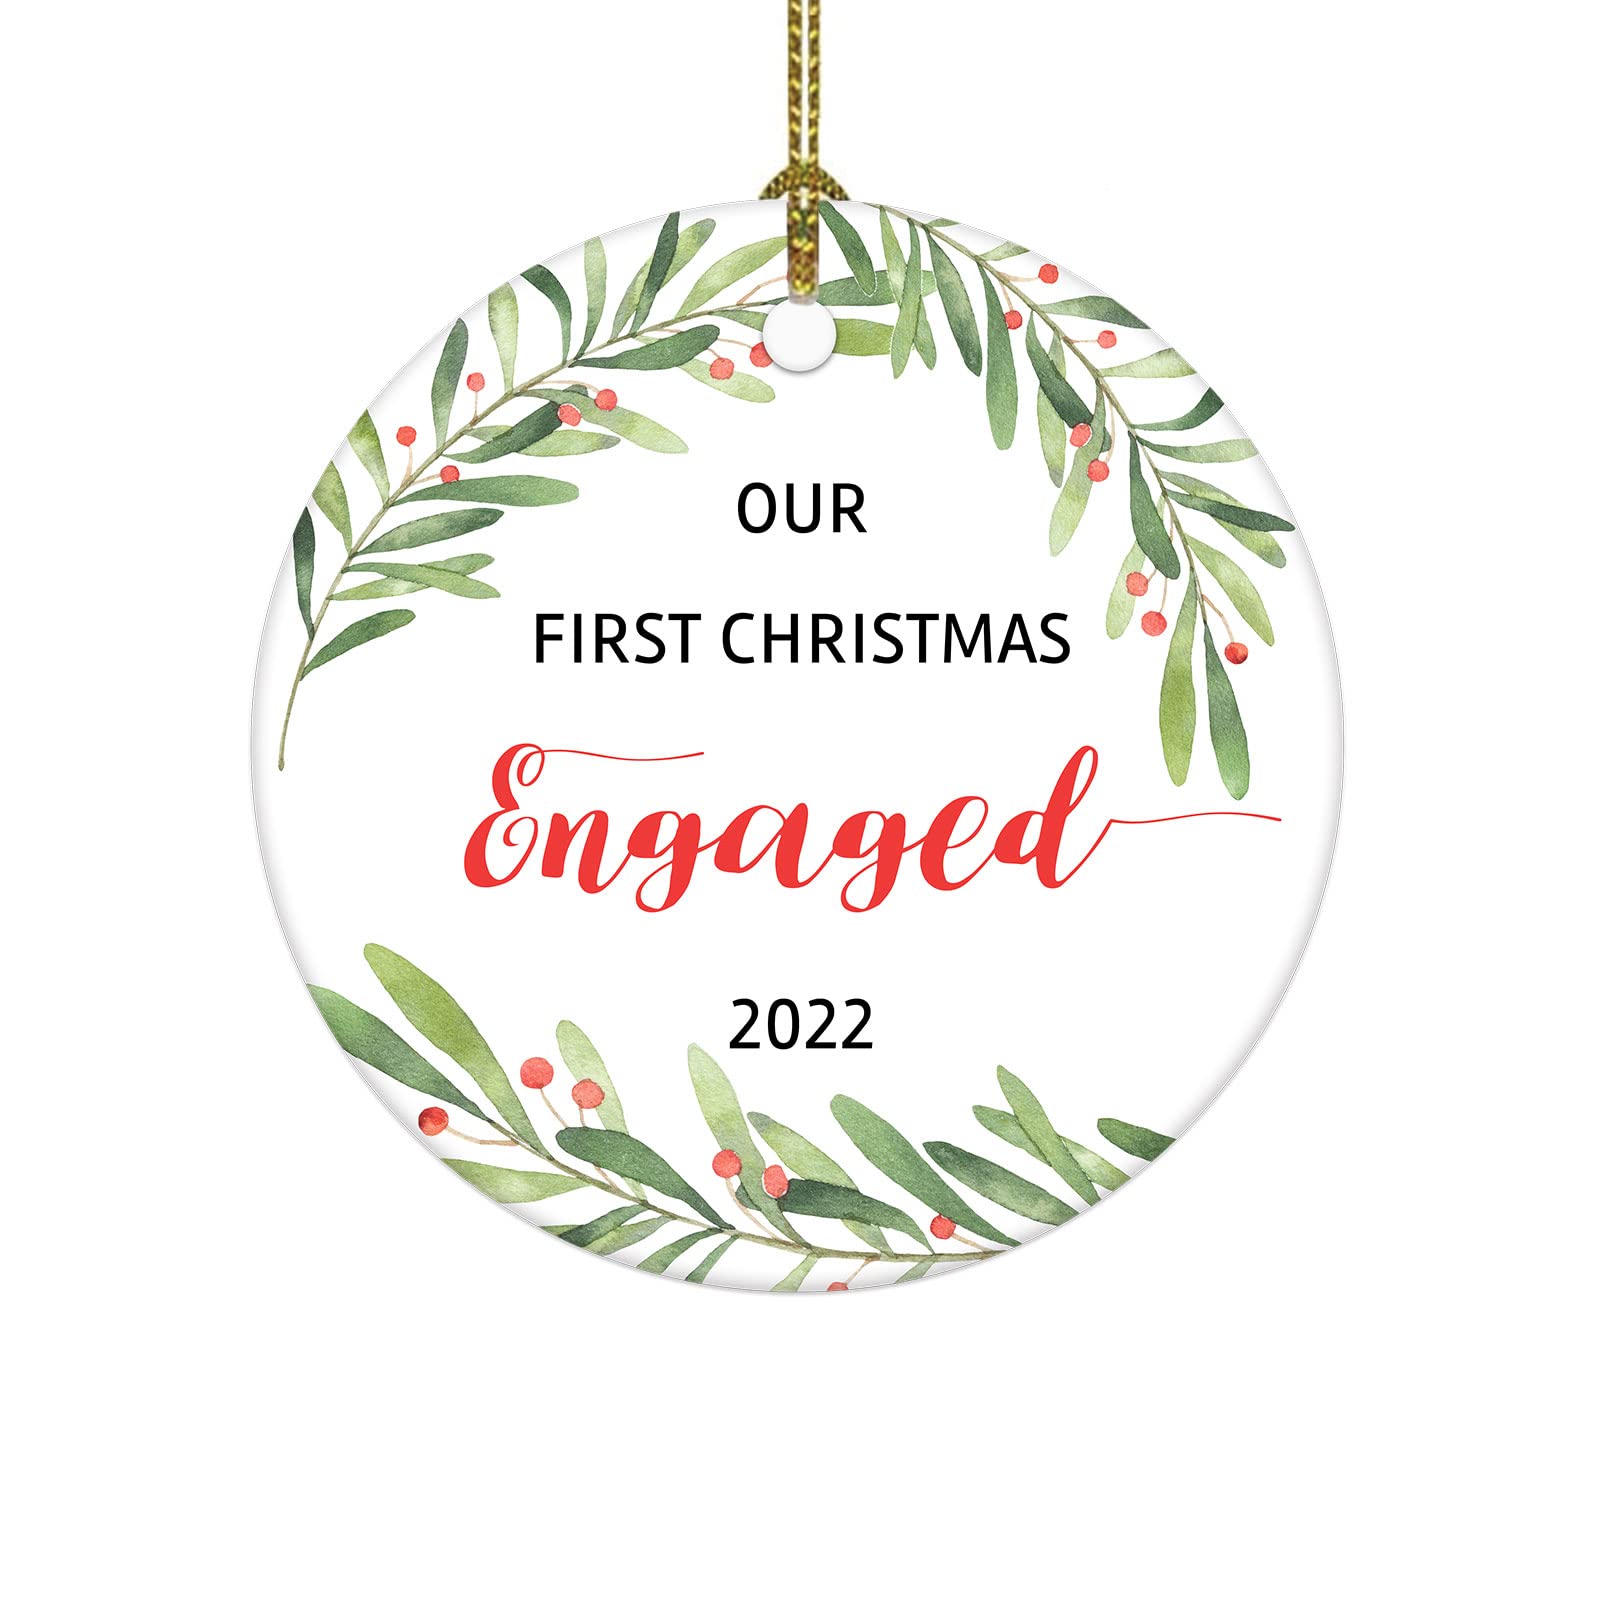 Mua Our First Christmas Engaged Ornament 2022 - Engaged Christmas ...